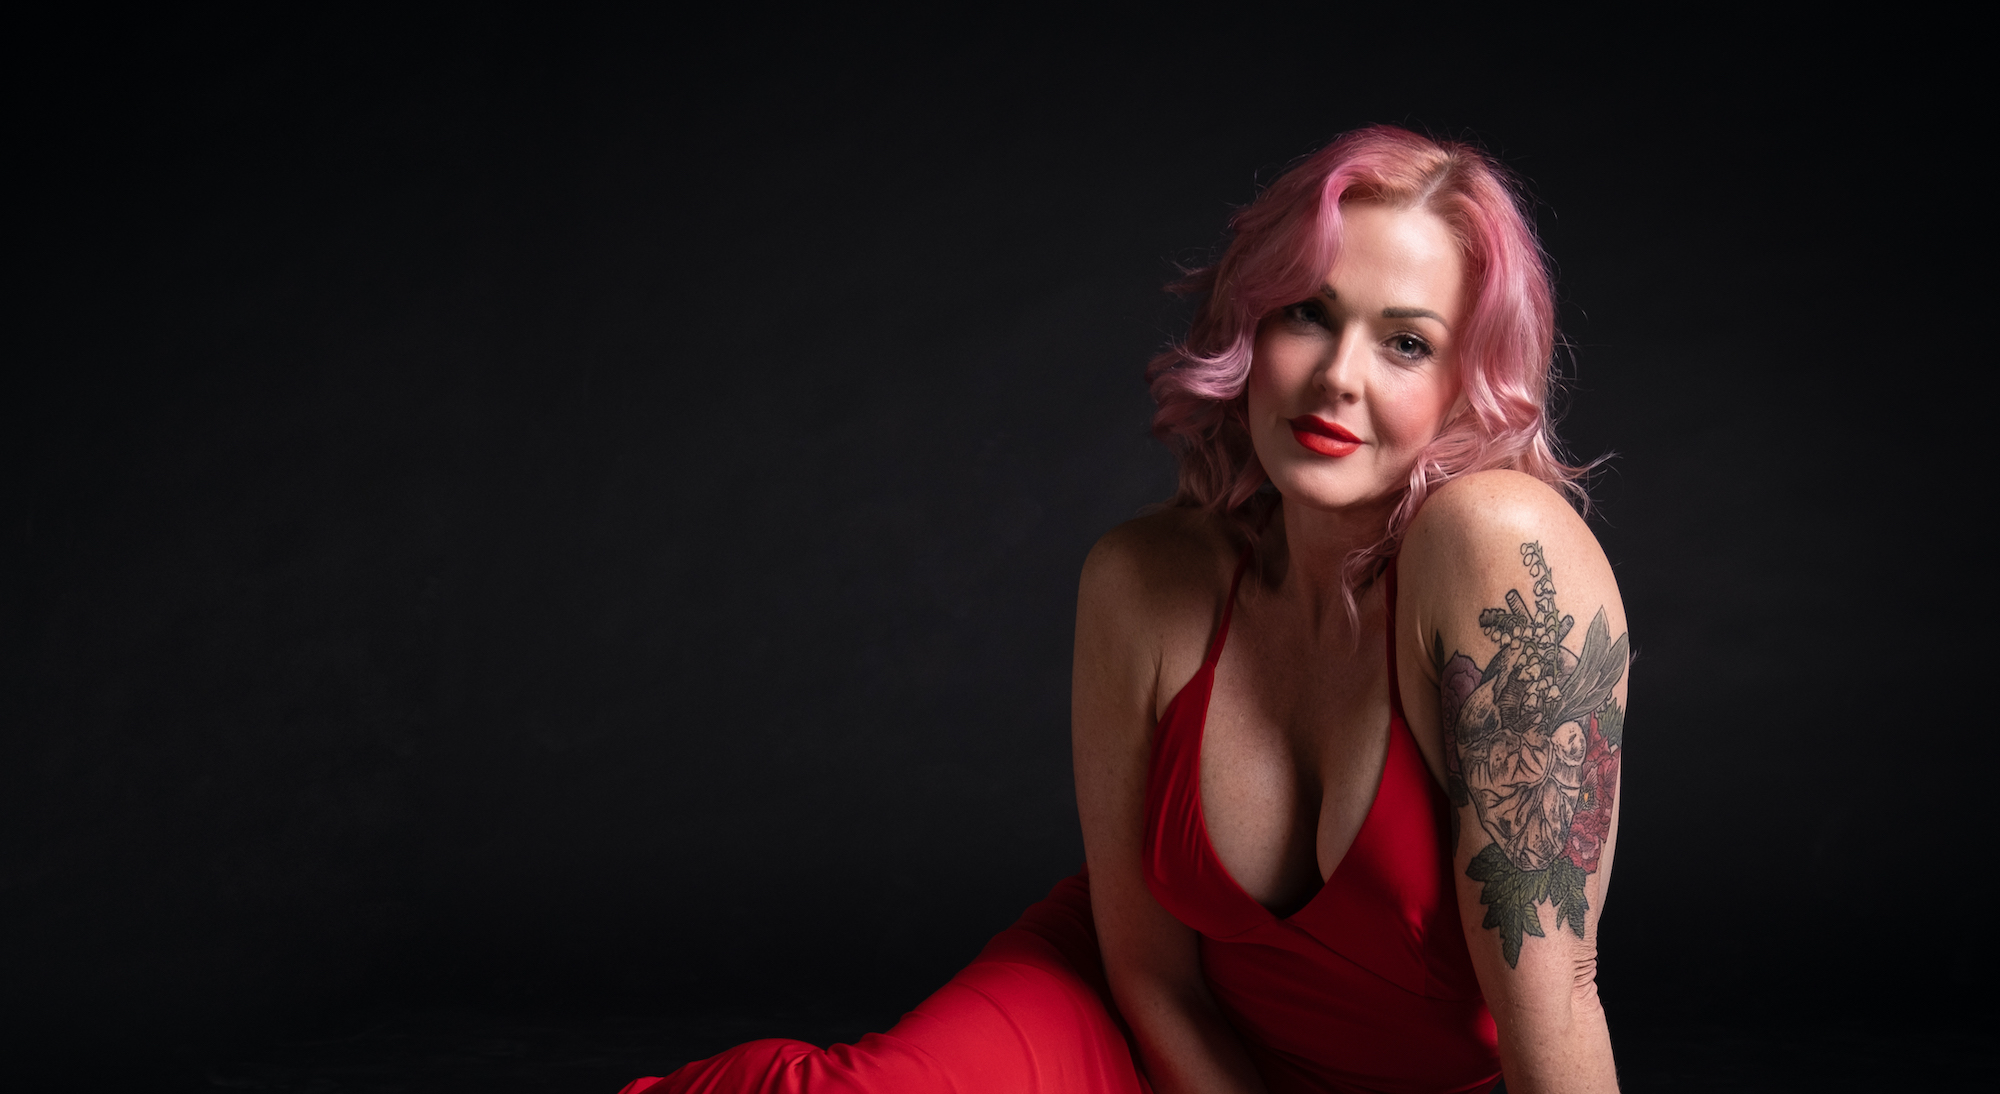 Storm Large in a red dress